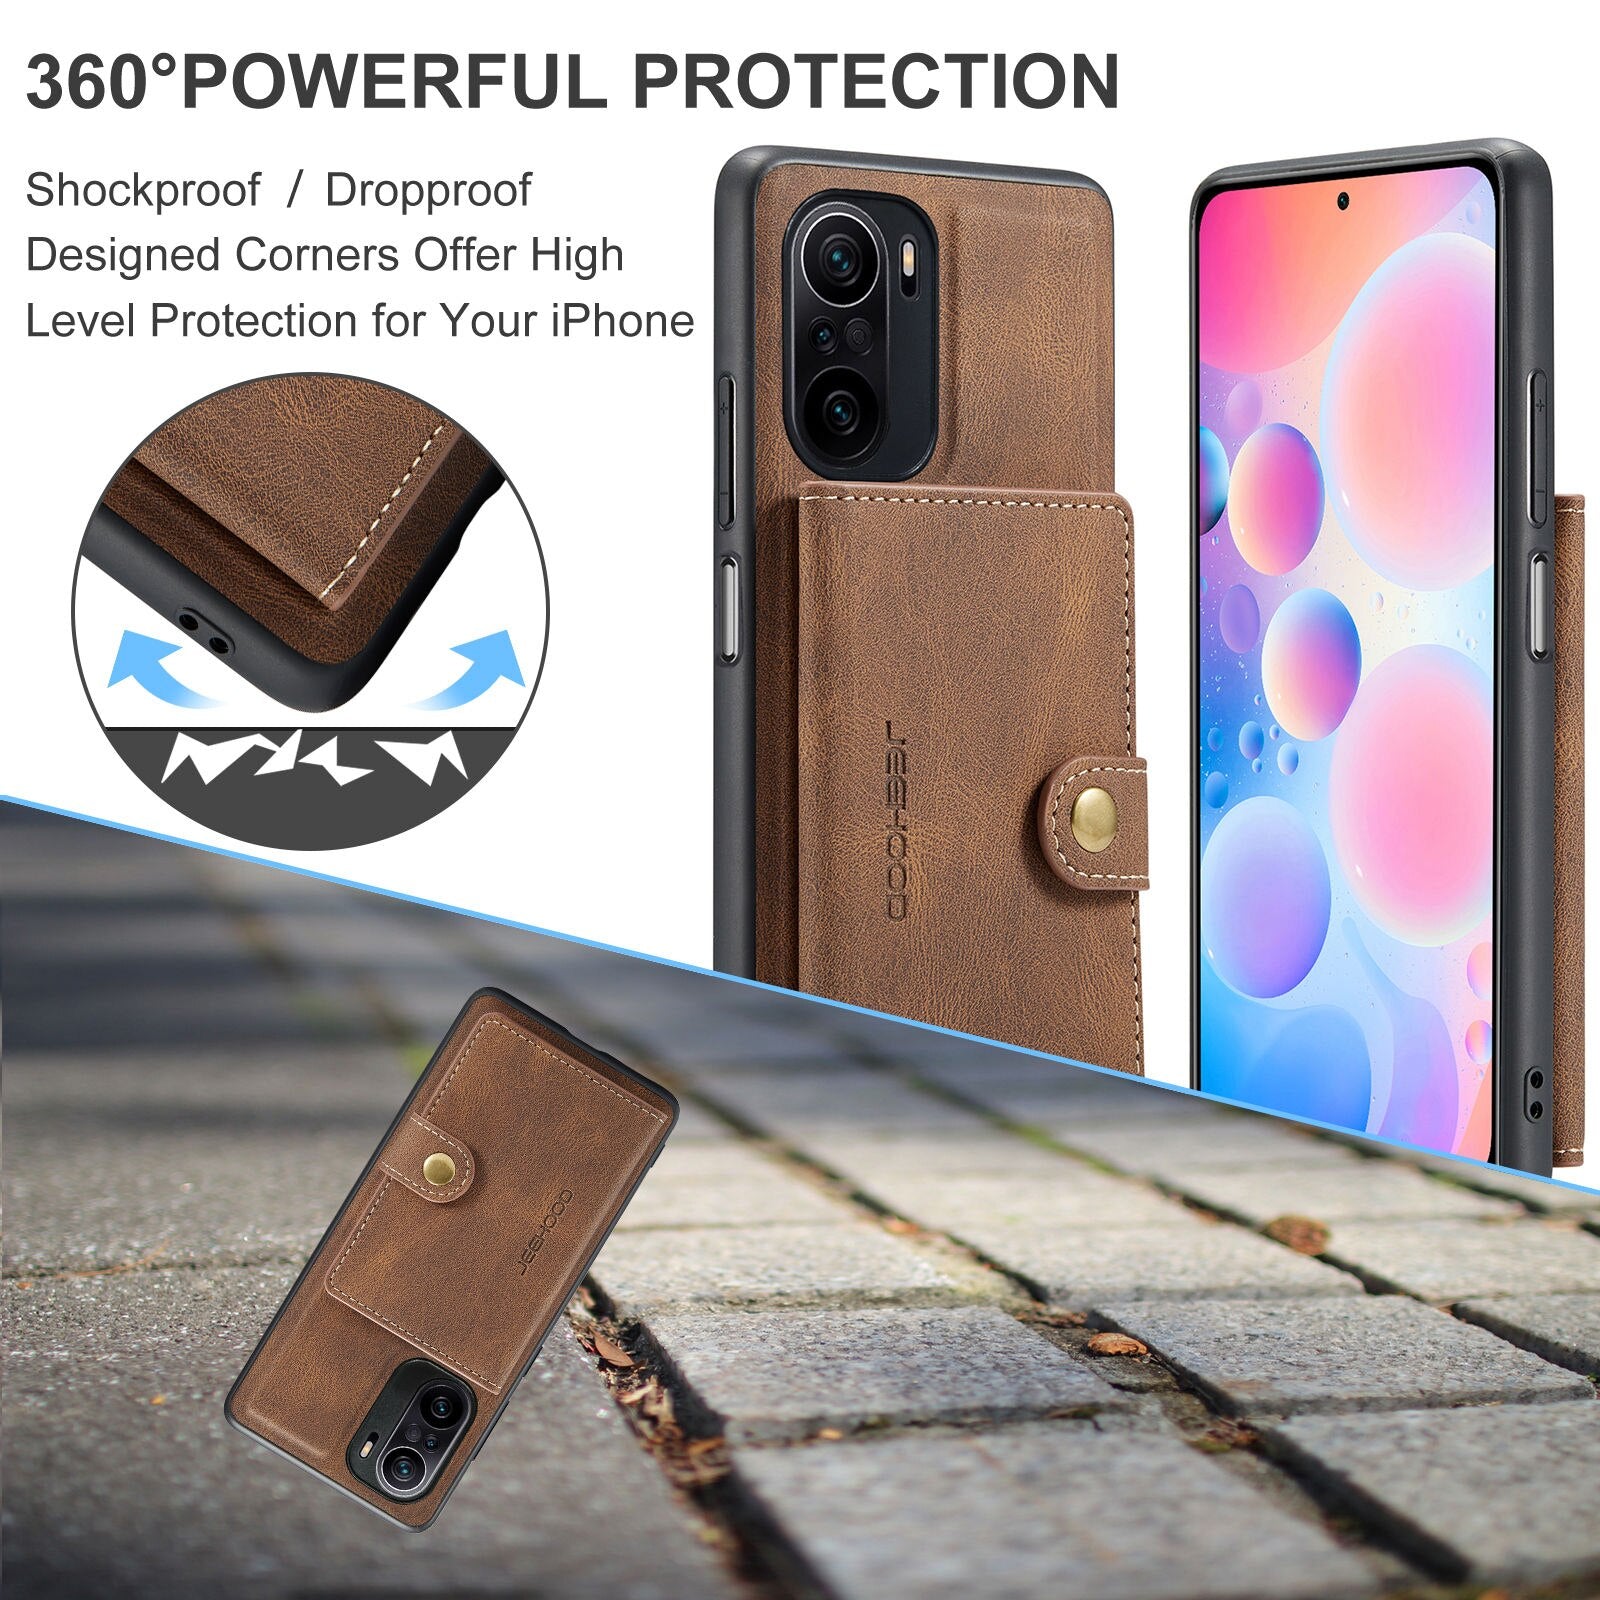 XiaoMi Poco F3/RedMi K40/RedMi K40 Pro - Leather Case with Magnetic Wallet Leather Small Wallet in Kickstand Card Holder Designed Cover - 380230 Find Epic Store